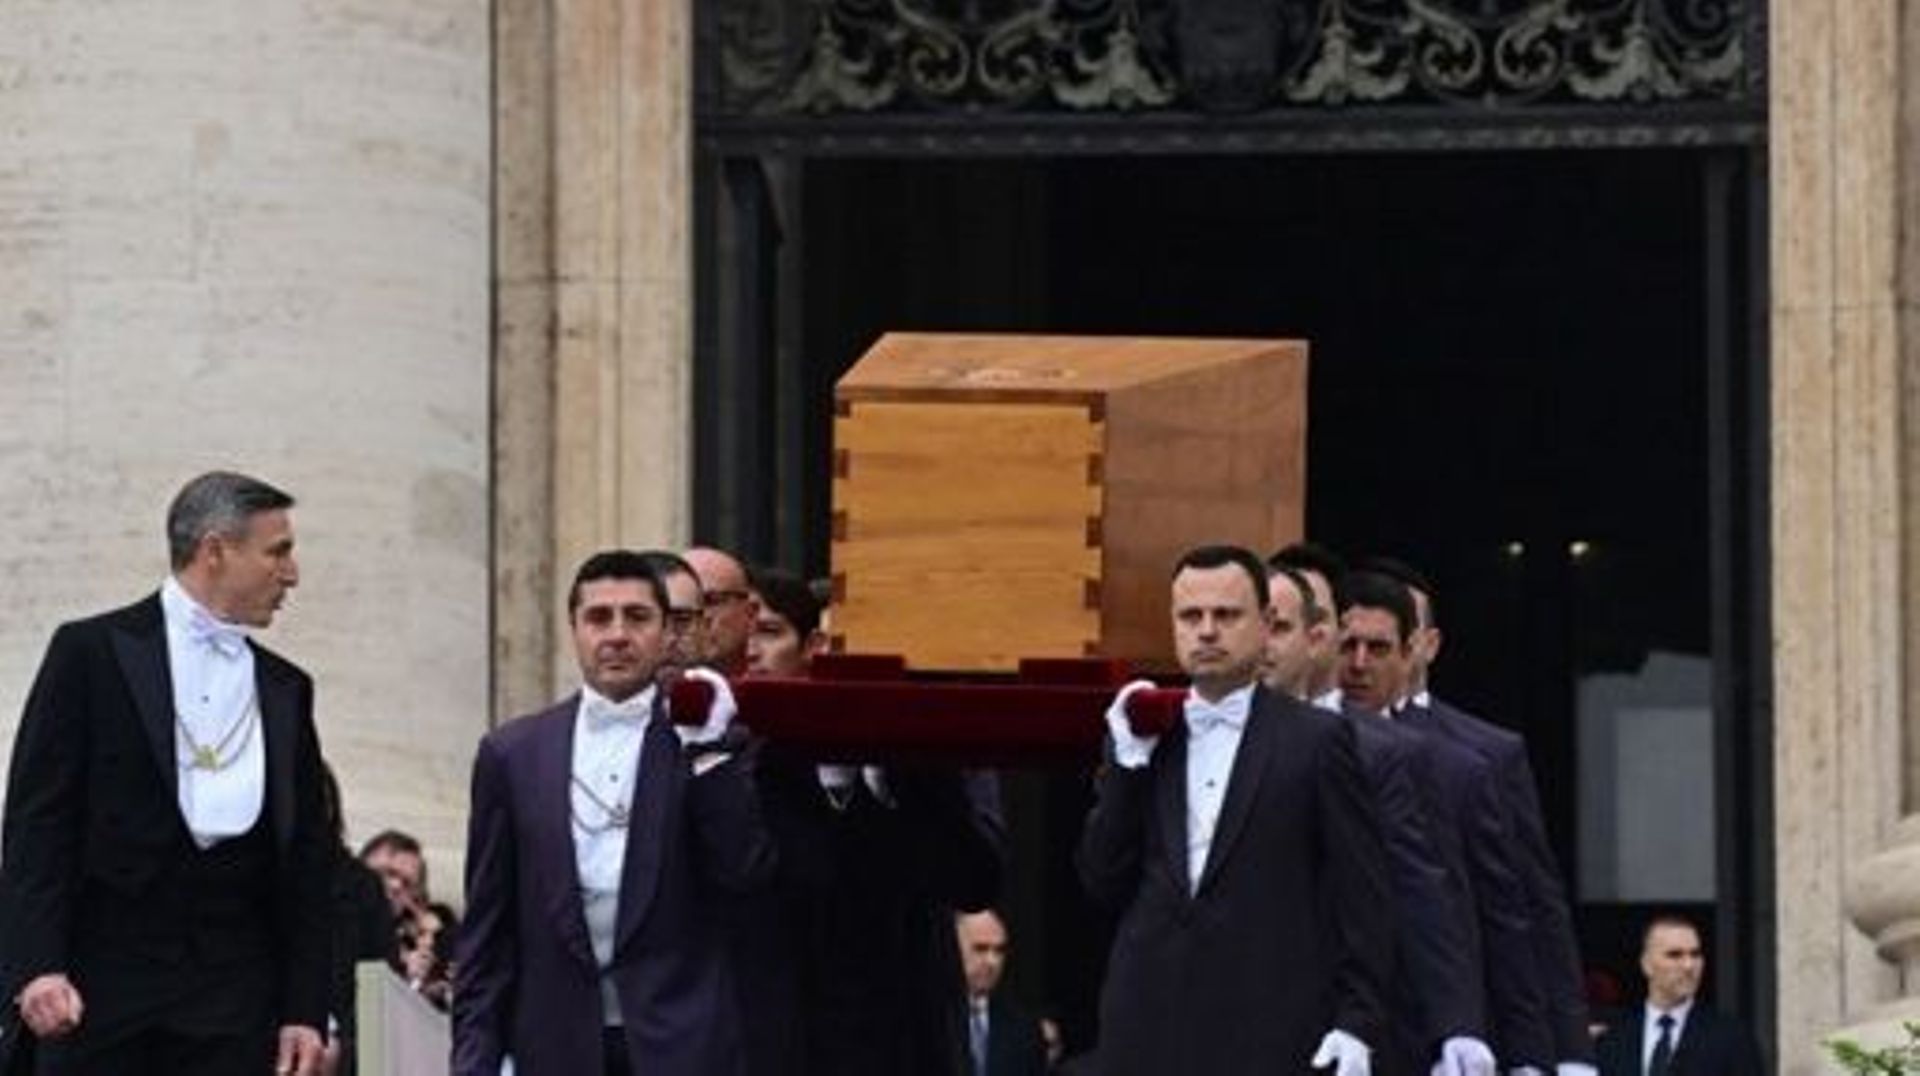 Pallbearers carry the coffin of Pope Emeritus Benedict XVI at the start of his funeral mass at St. Peter’s square in the Vatican, on January 5, 2023. Tiziana FABI / AFP